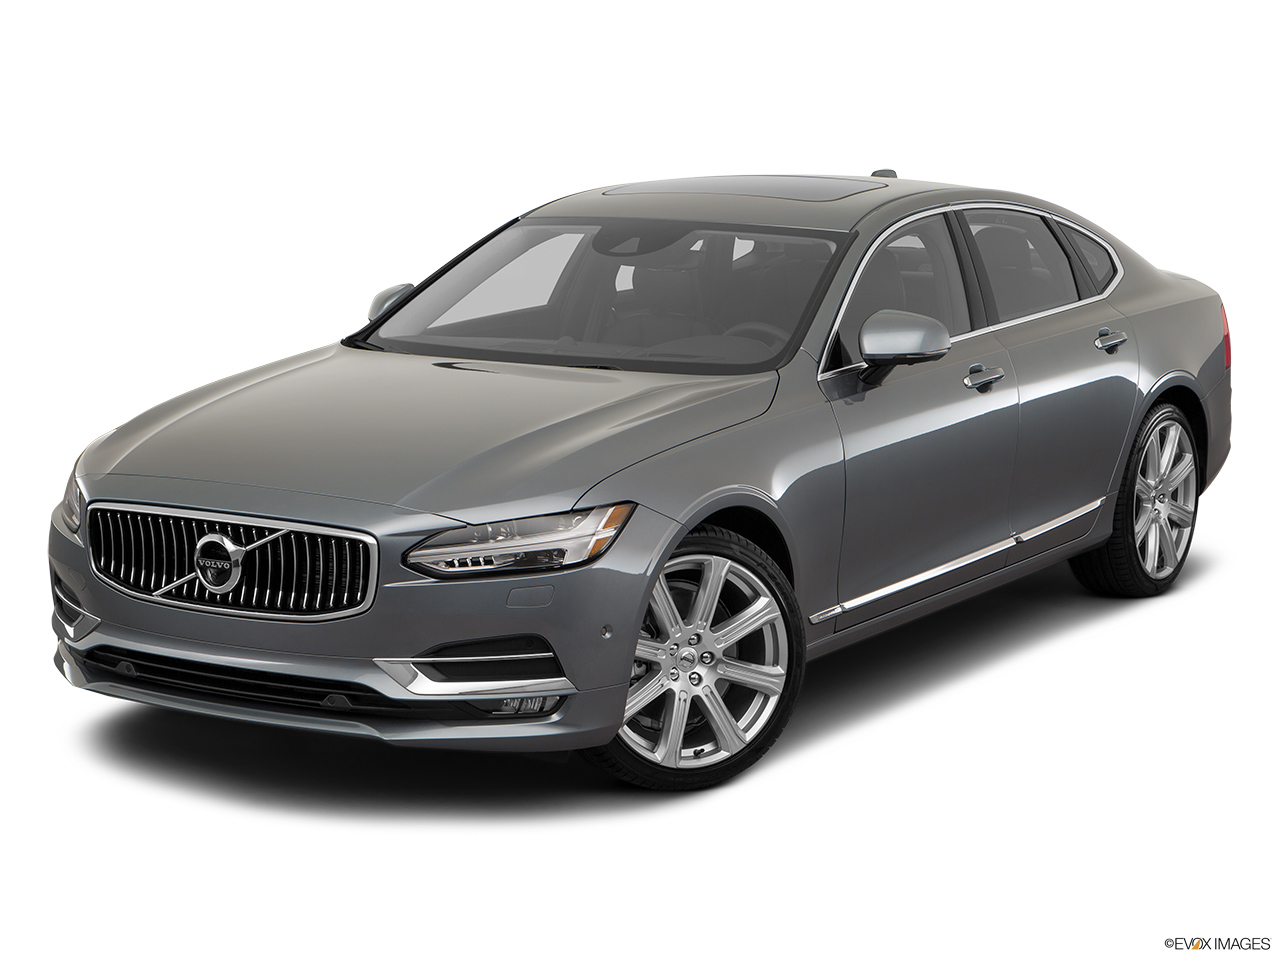 2017 Volvo S90 T6 Inscription Front angle view. 